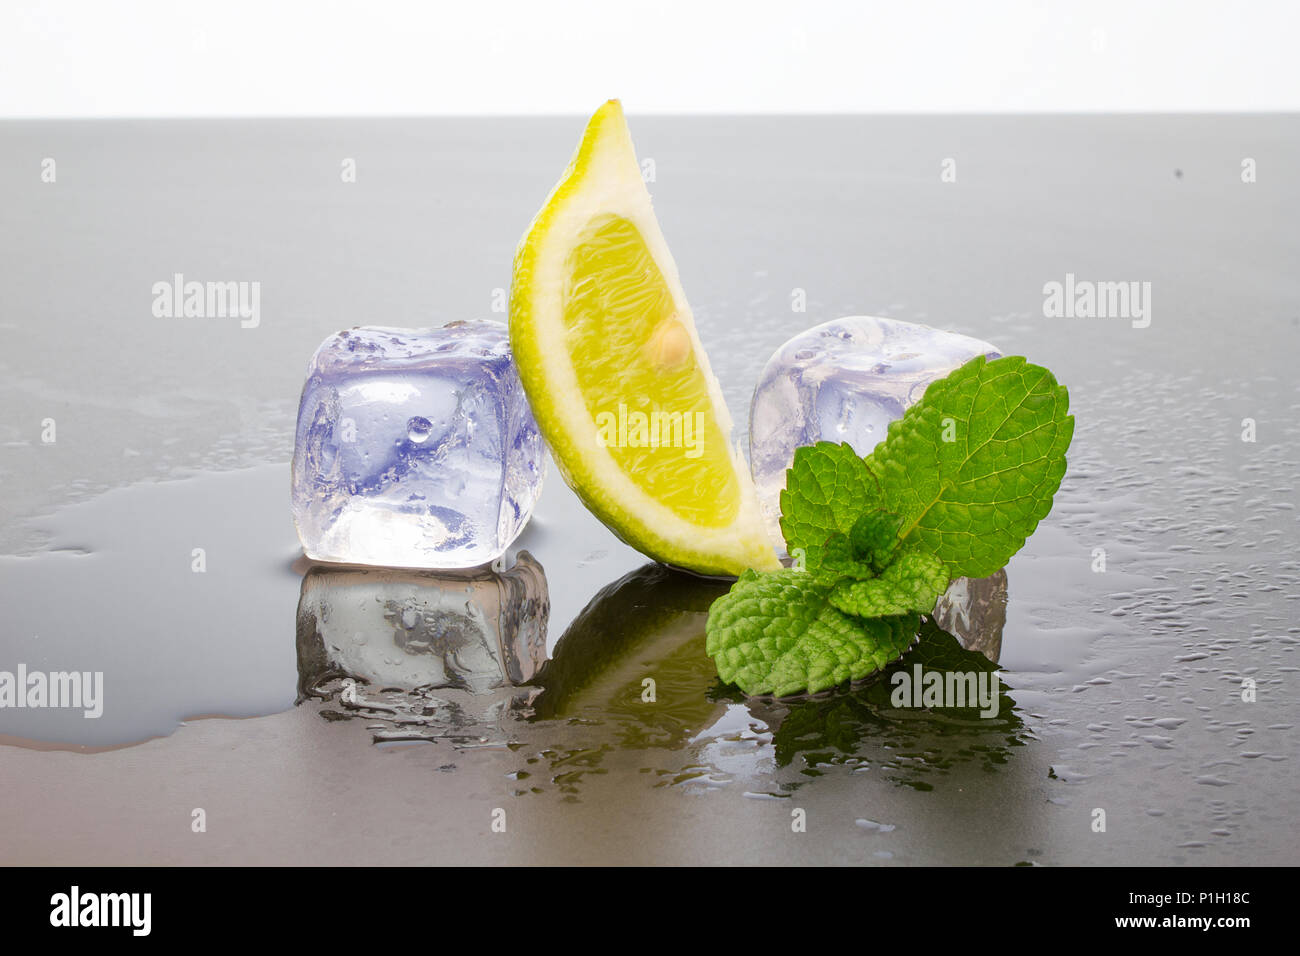 colorful cocktails in glass beaker with ice Stock Photo